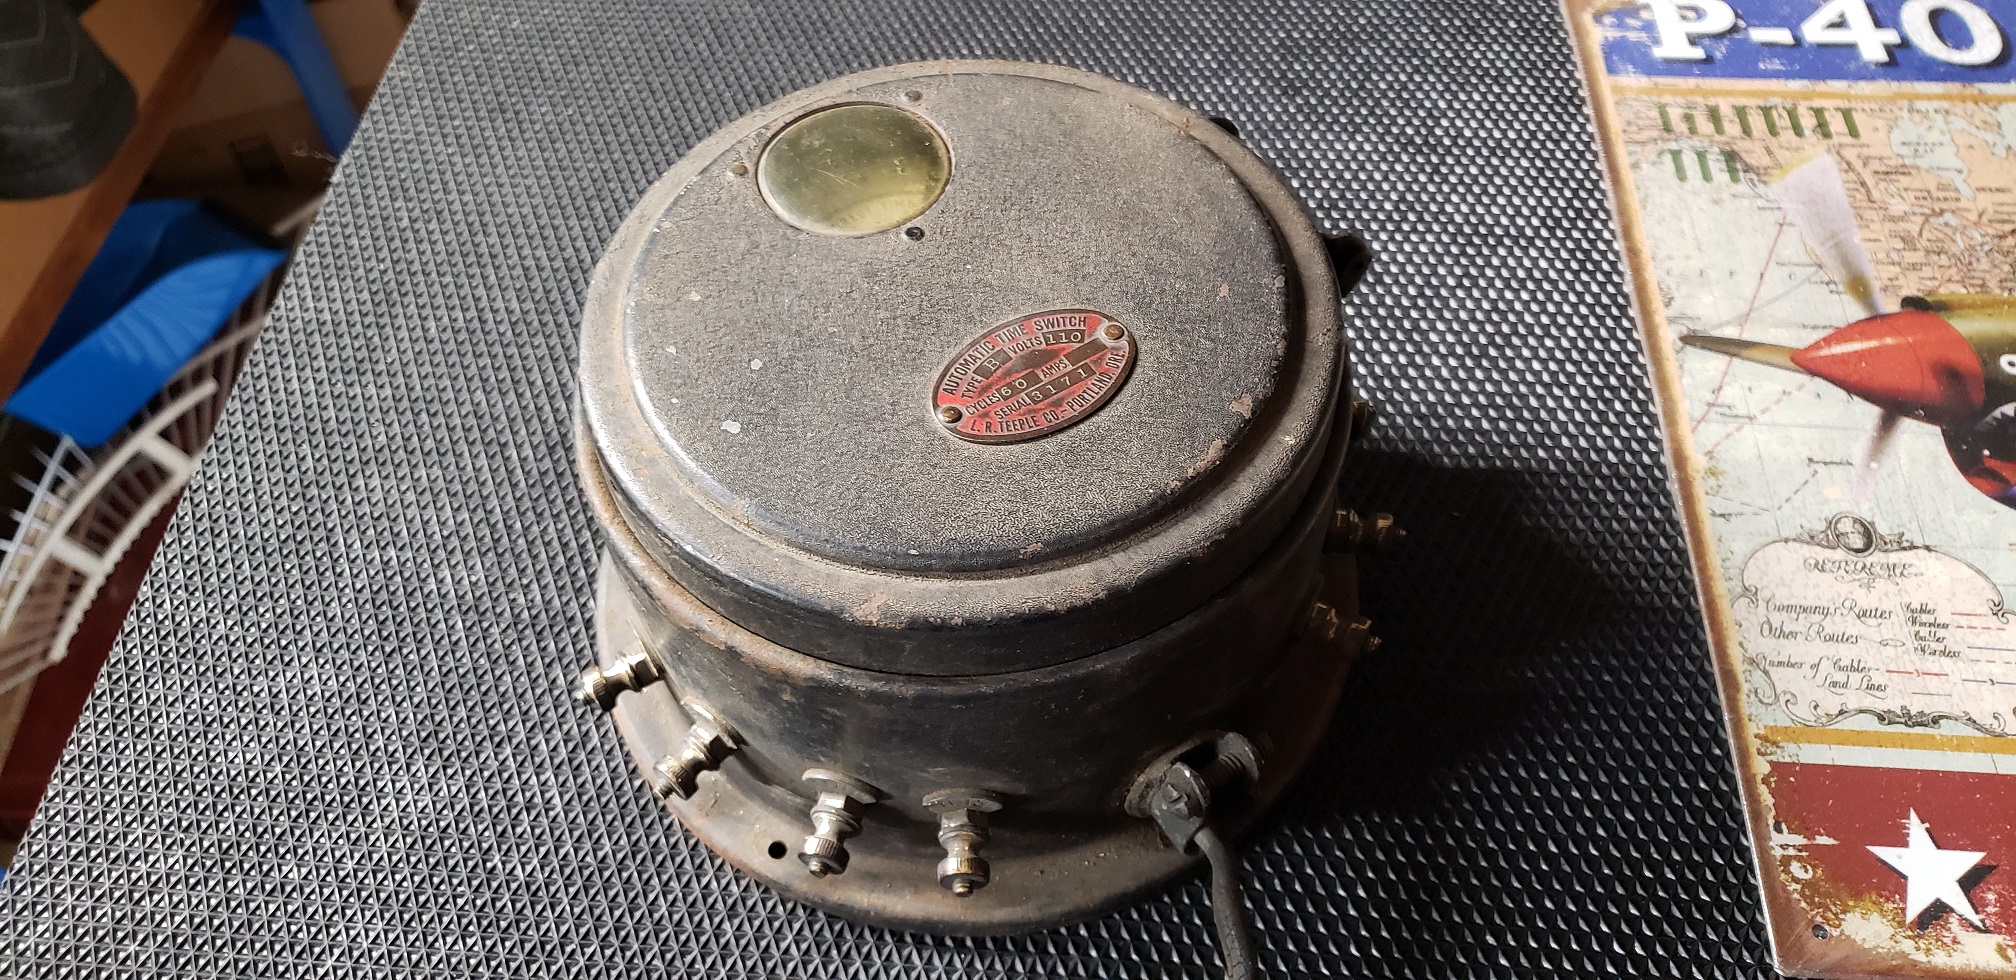 L.R. Teeple Co. 110v. electrical timer switch ca. mid '30s